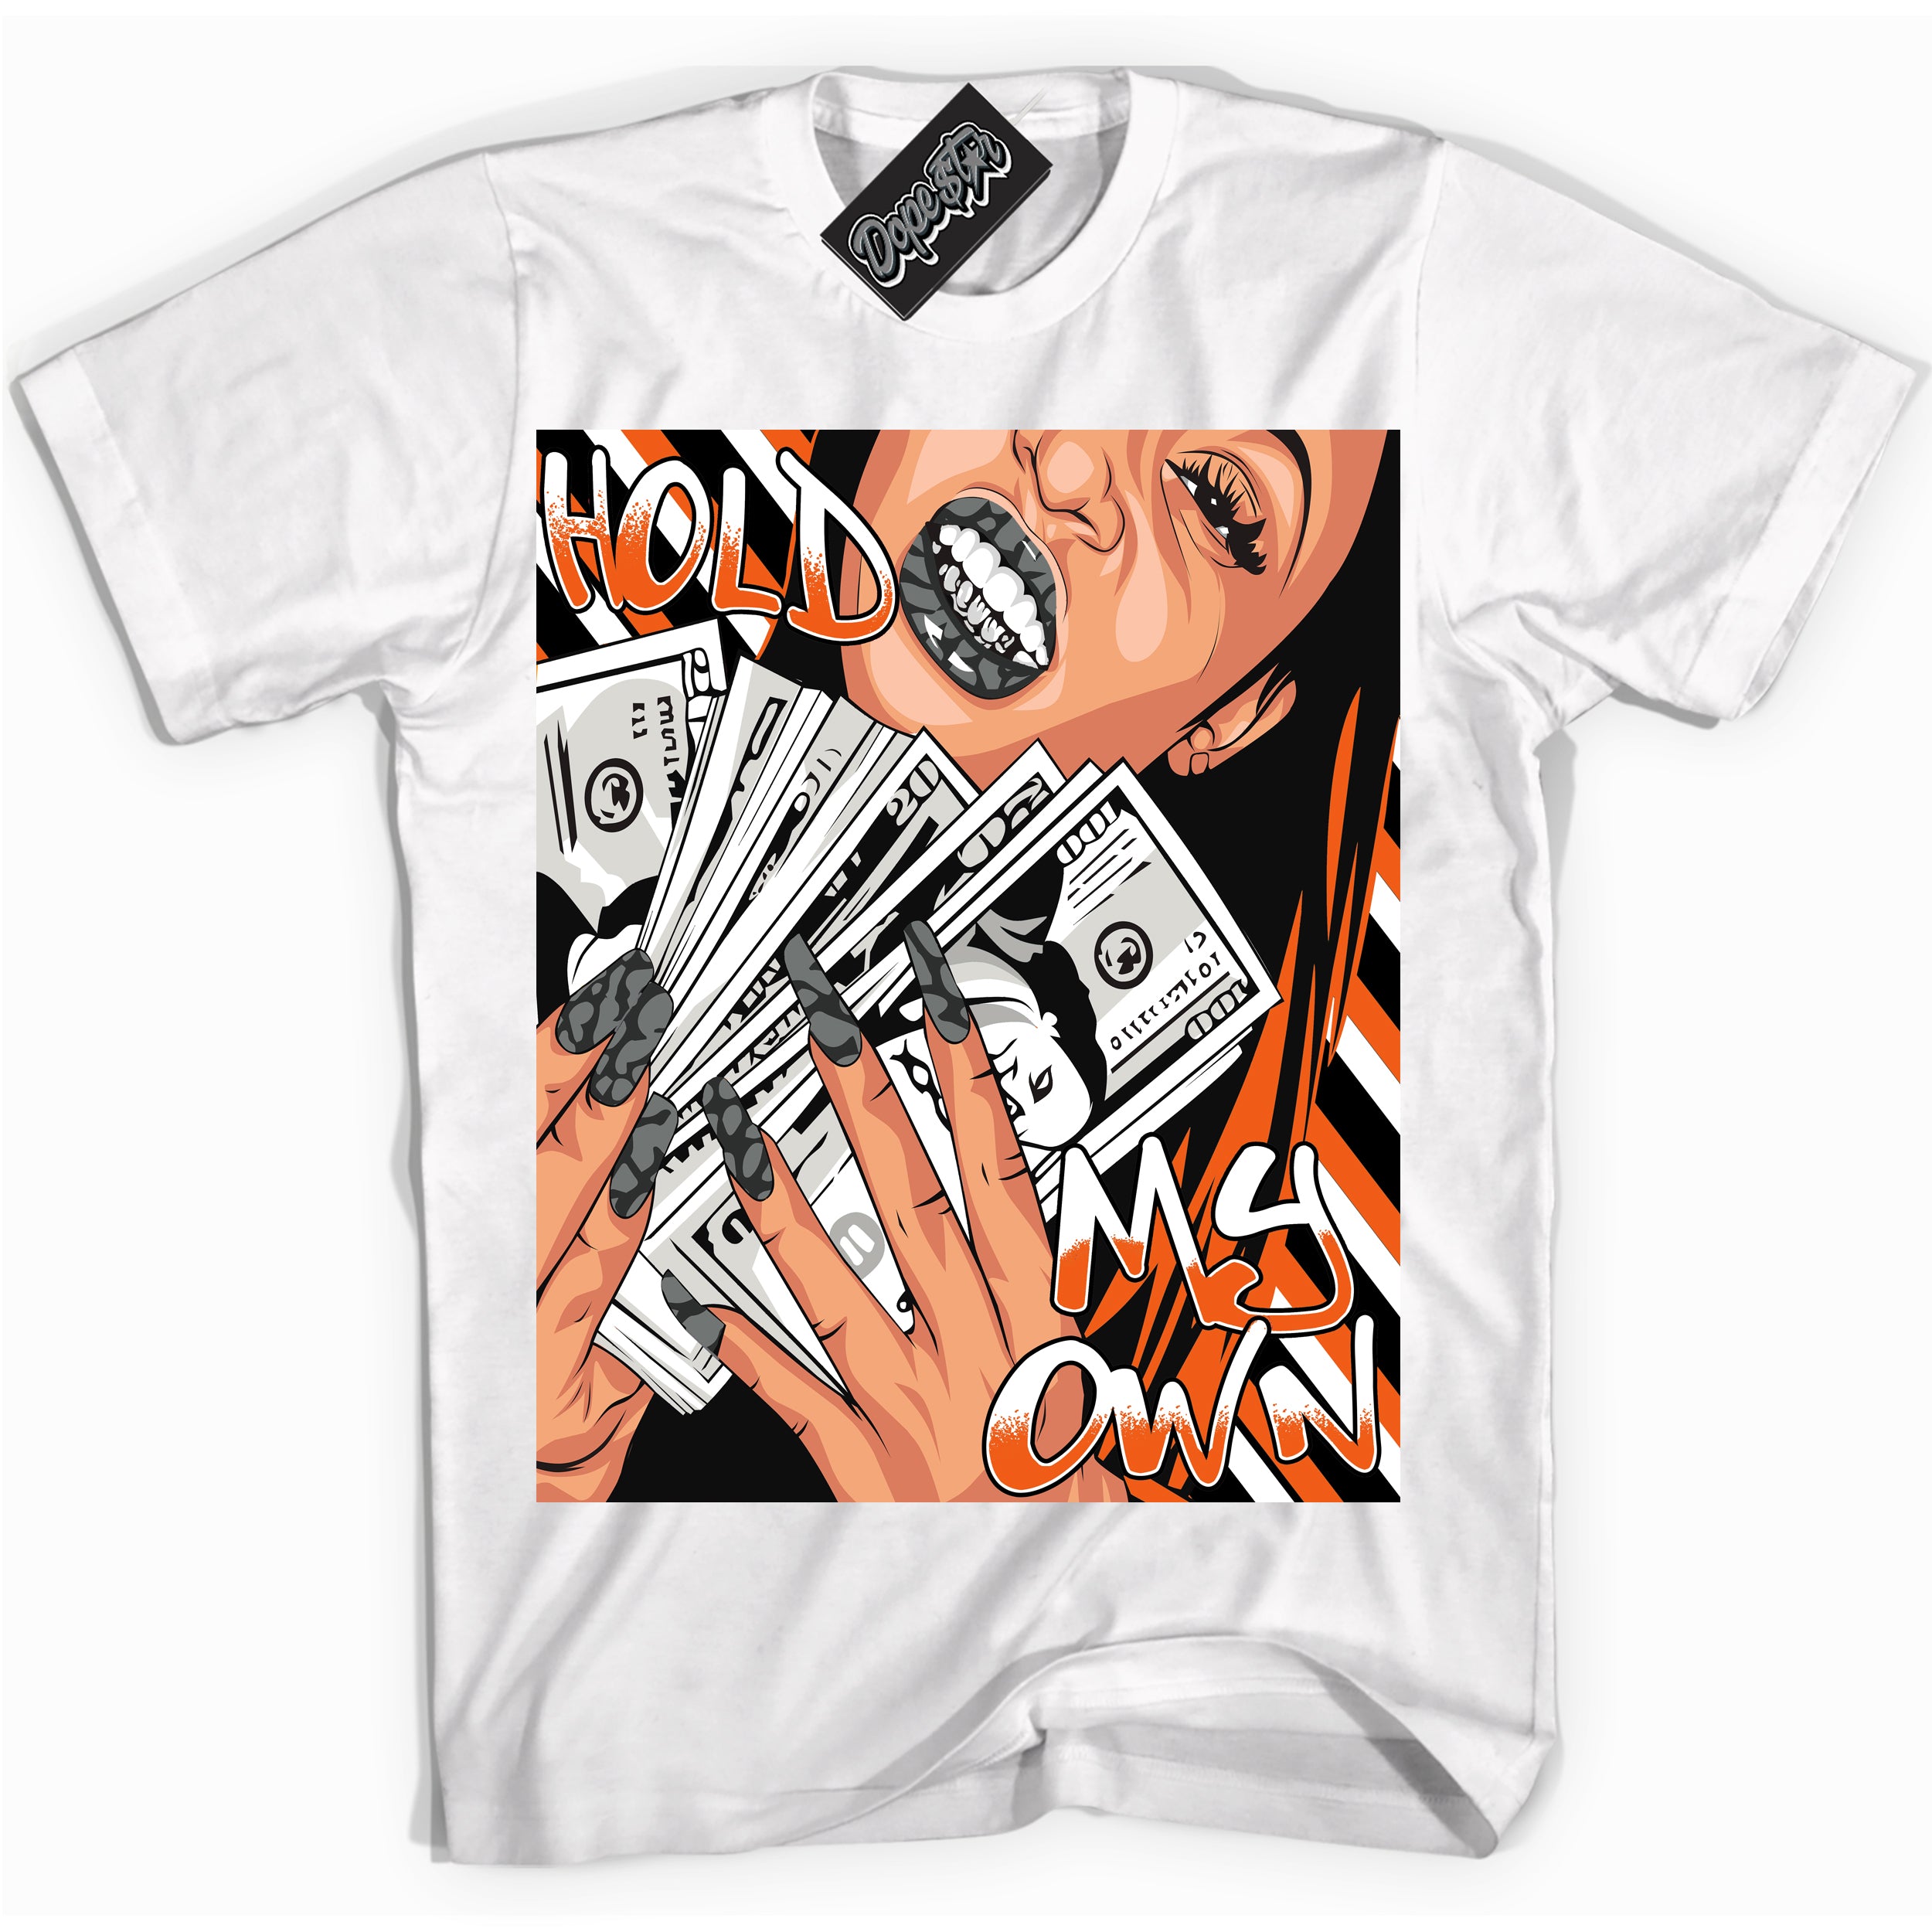 Cool White graphic tee with “ Hold My Own ” design, that perfectly matches Fear Pack 3s sneakers 